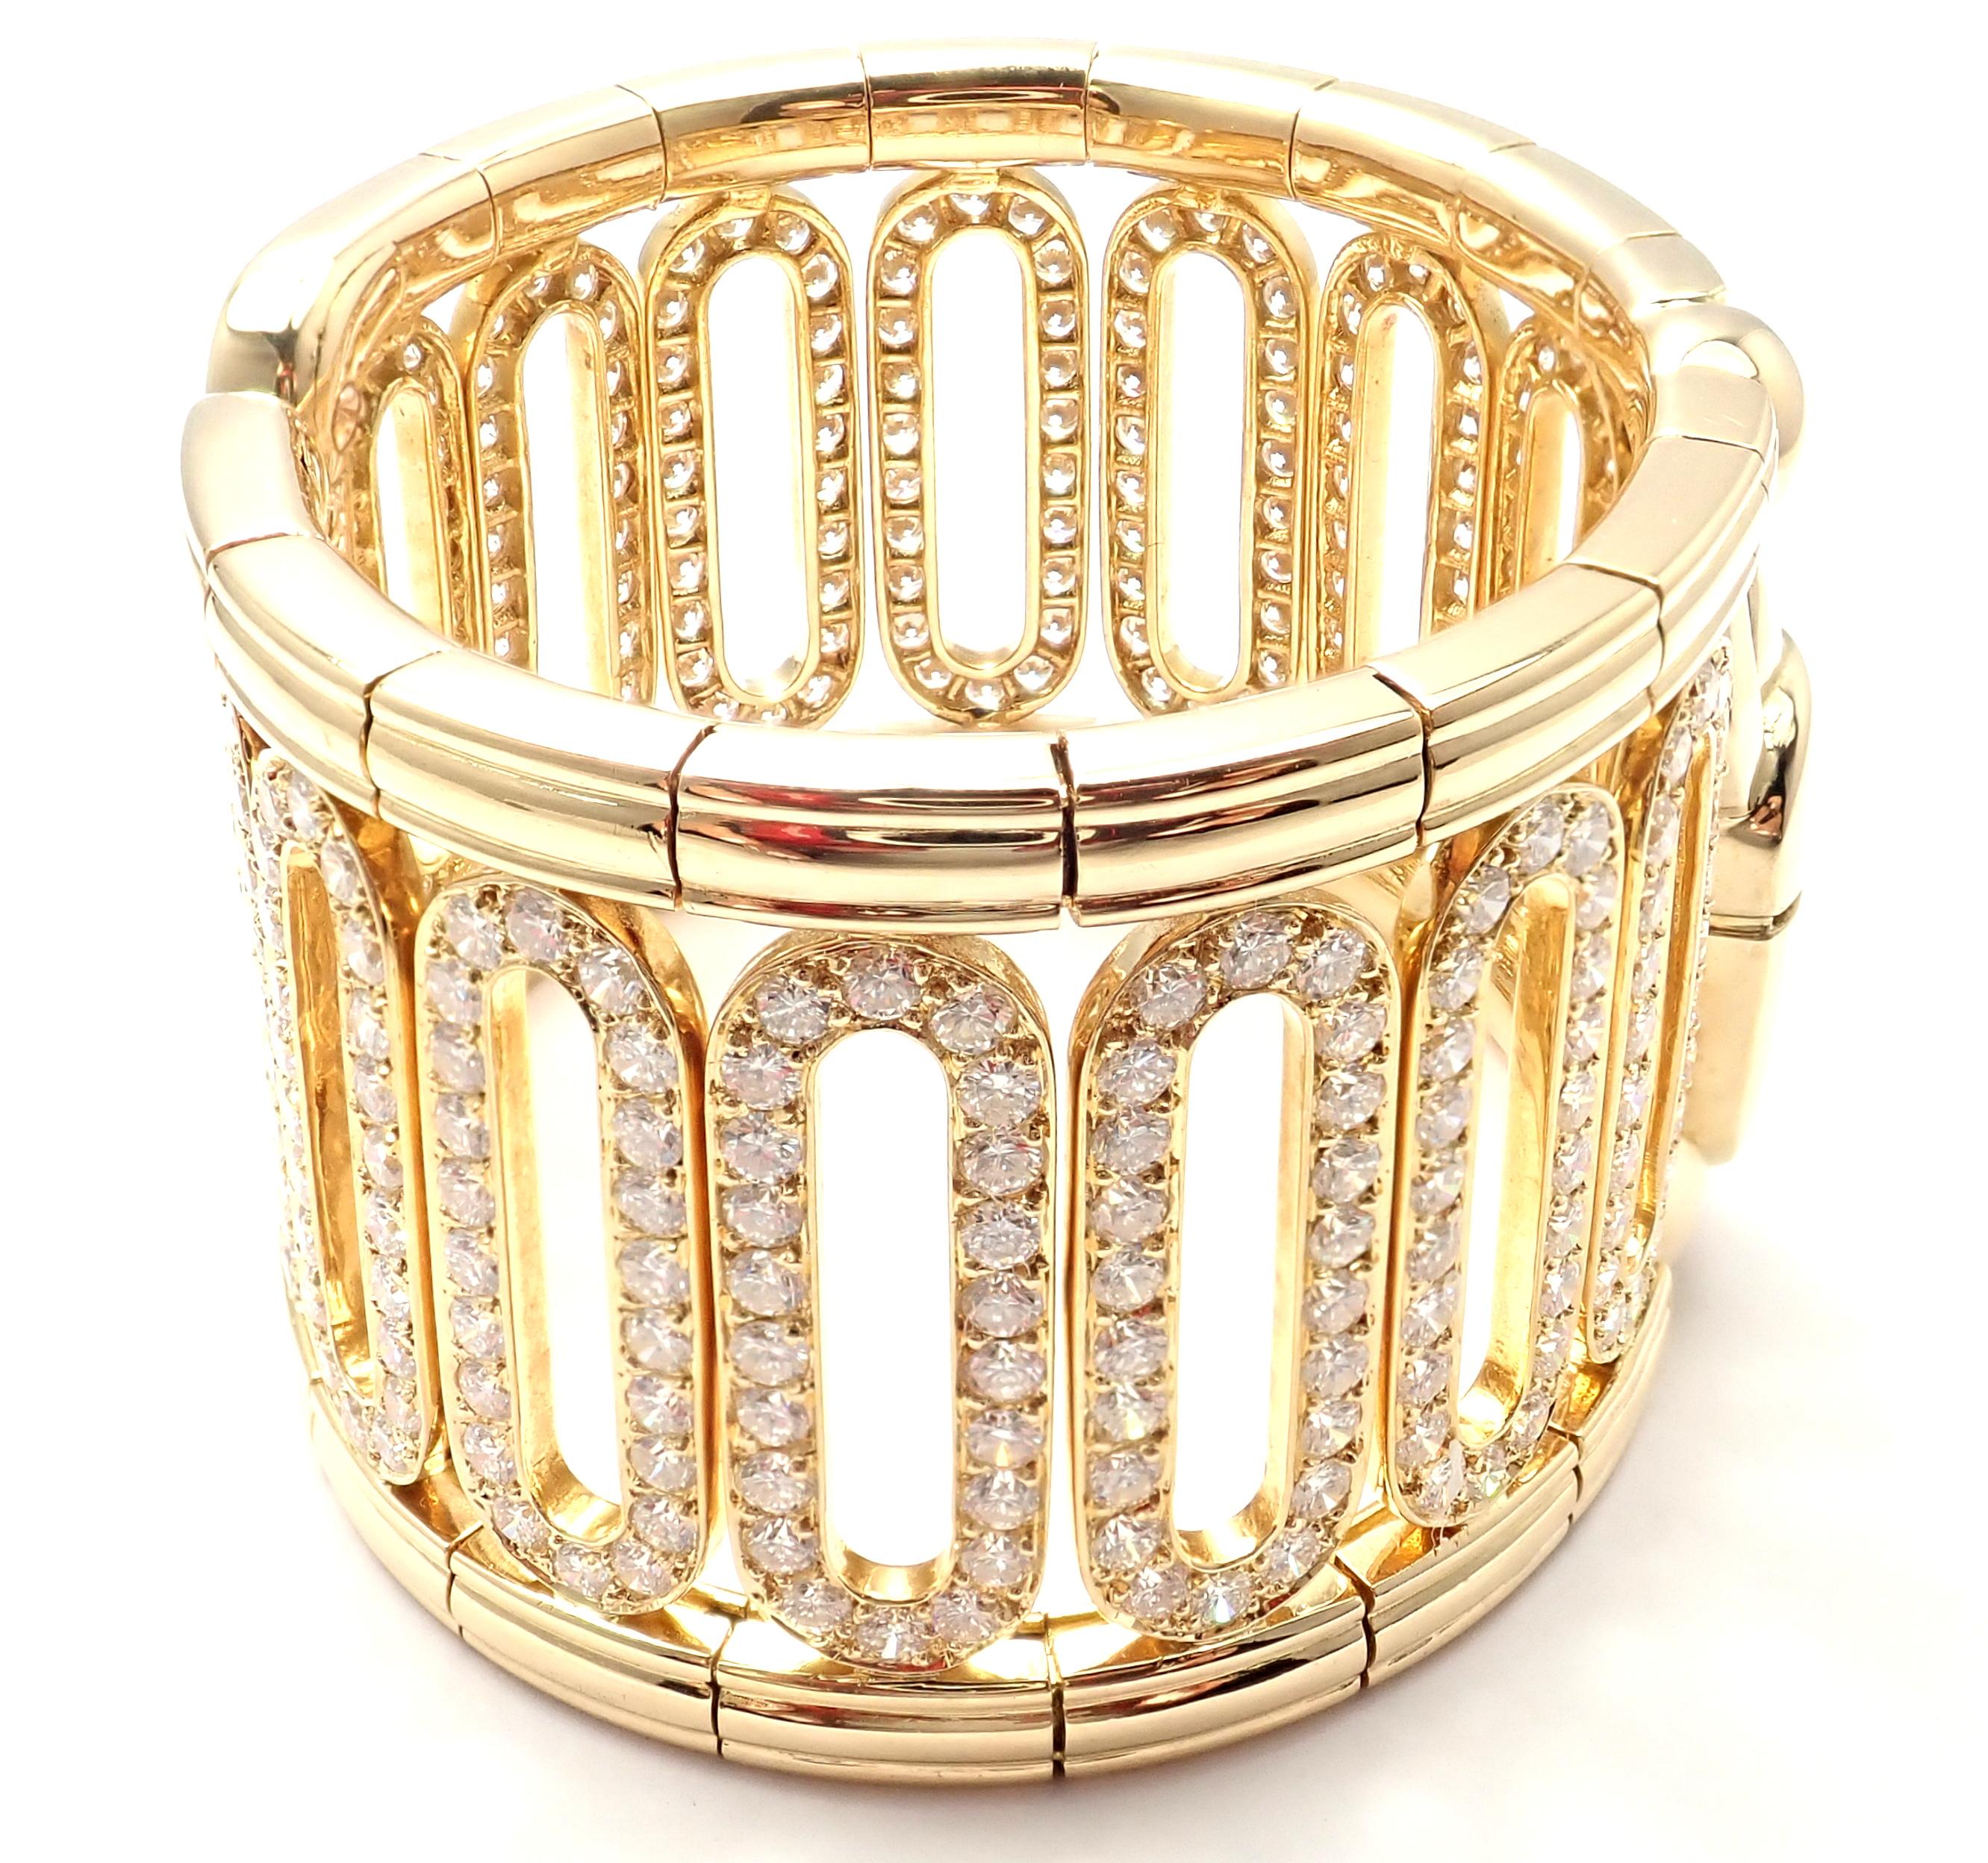 18k Yellow Gold Scarab Diamond Cuff Bangle Bracelet by Cartier. 
With 308 round brilliant cut diamonds VVS1 clarity, E color total weight approx. 15.4ct
Details:
Length: 6.5